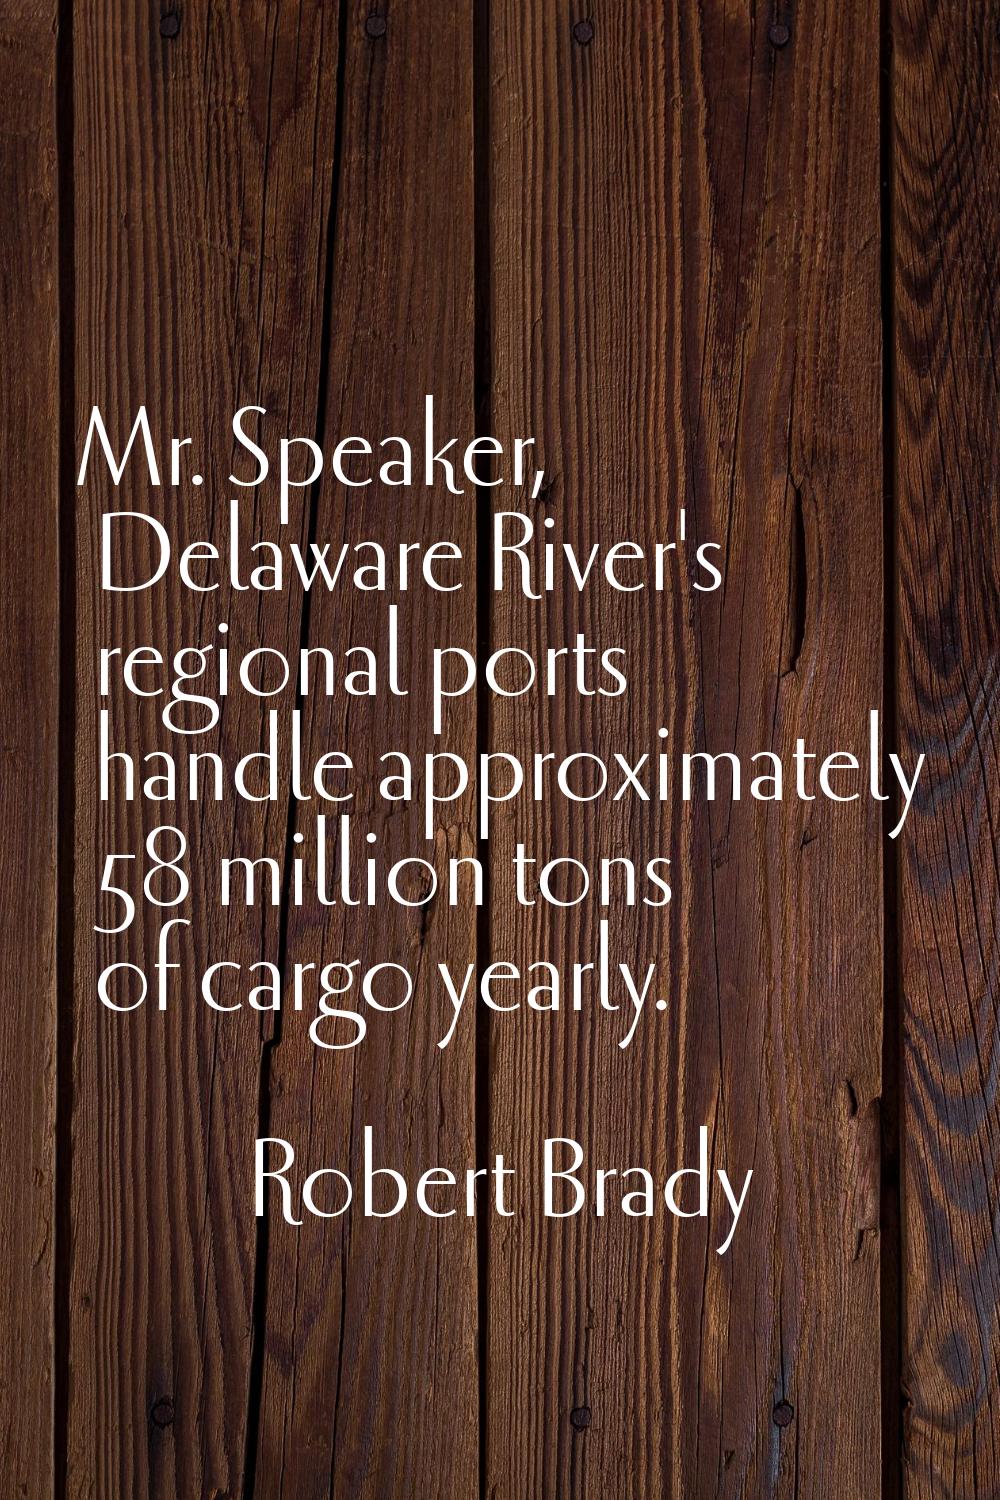 Mr. Speaker, Delaware River's regional ports handle approximately 58 million tons of cargo yearly.